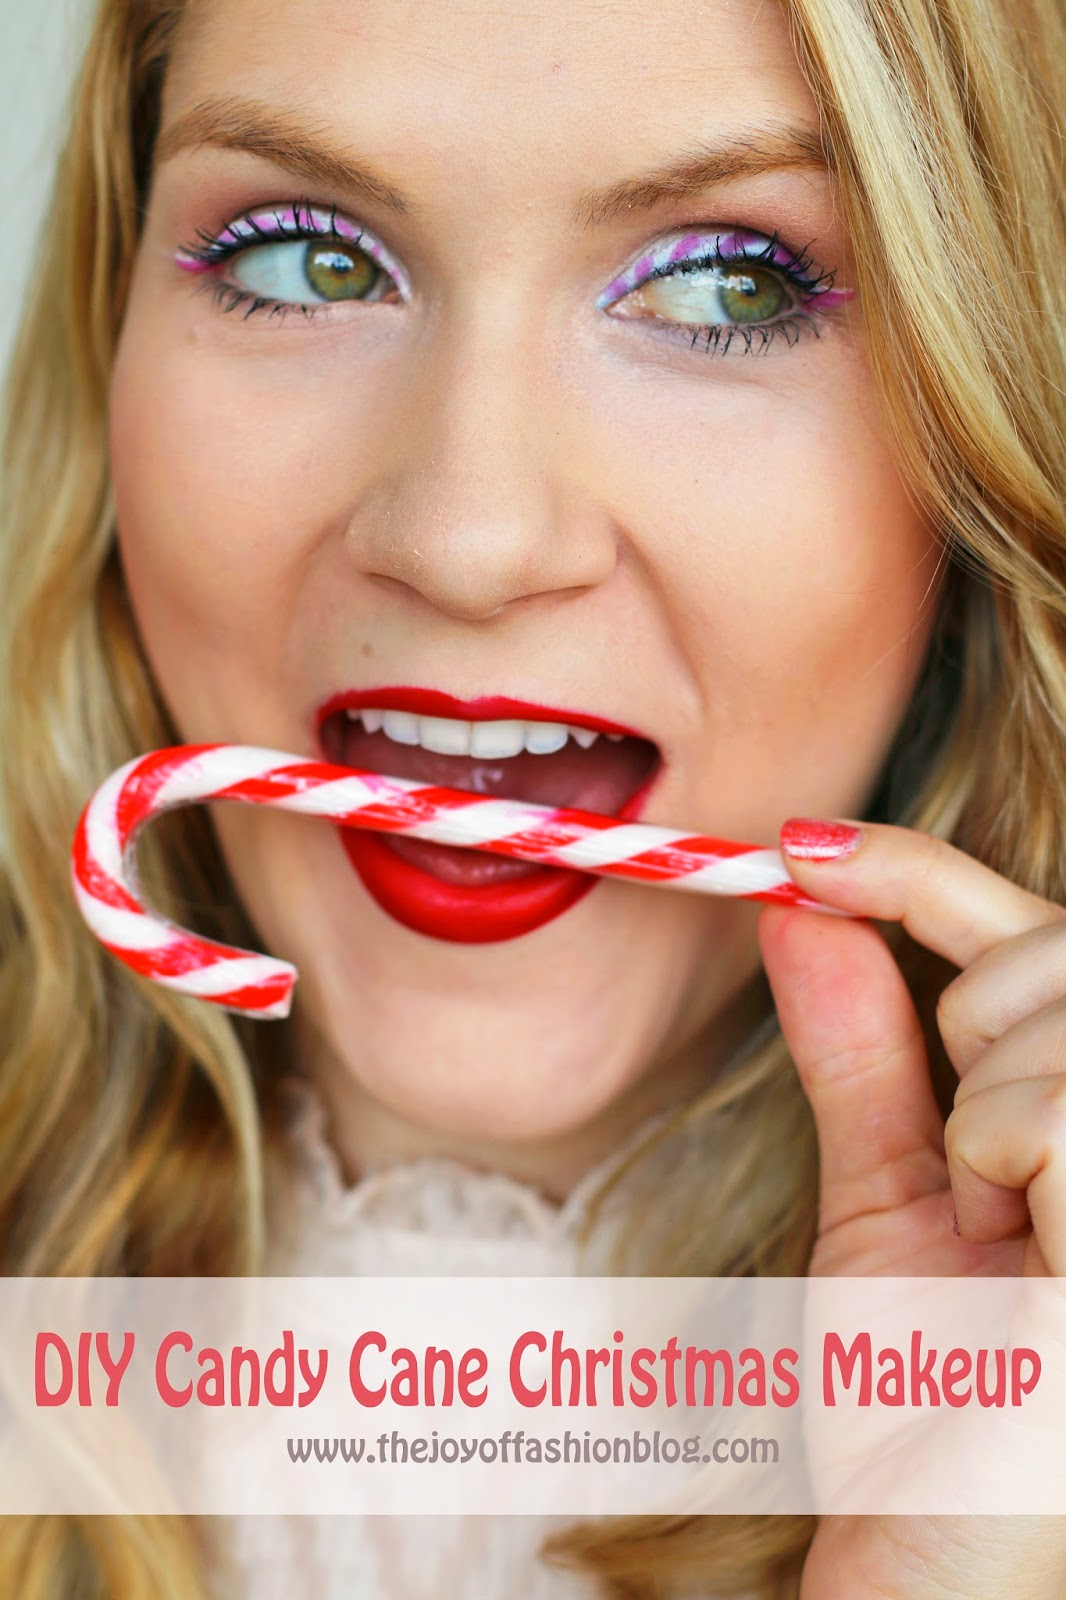 Super cute candy cane makeup for Christmas! Click through for full tutorial